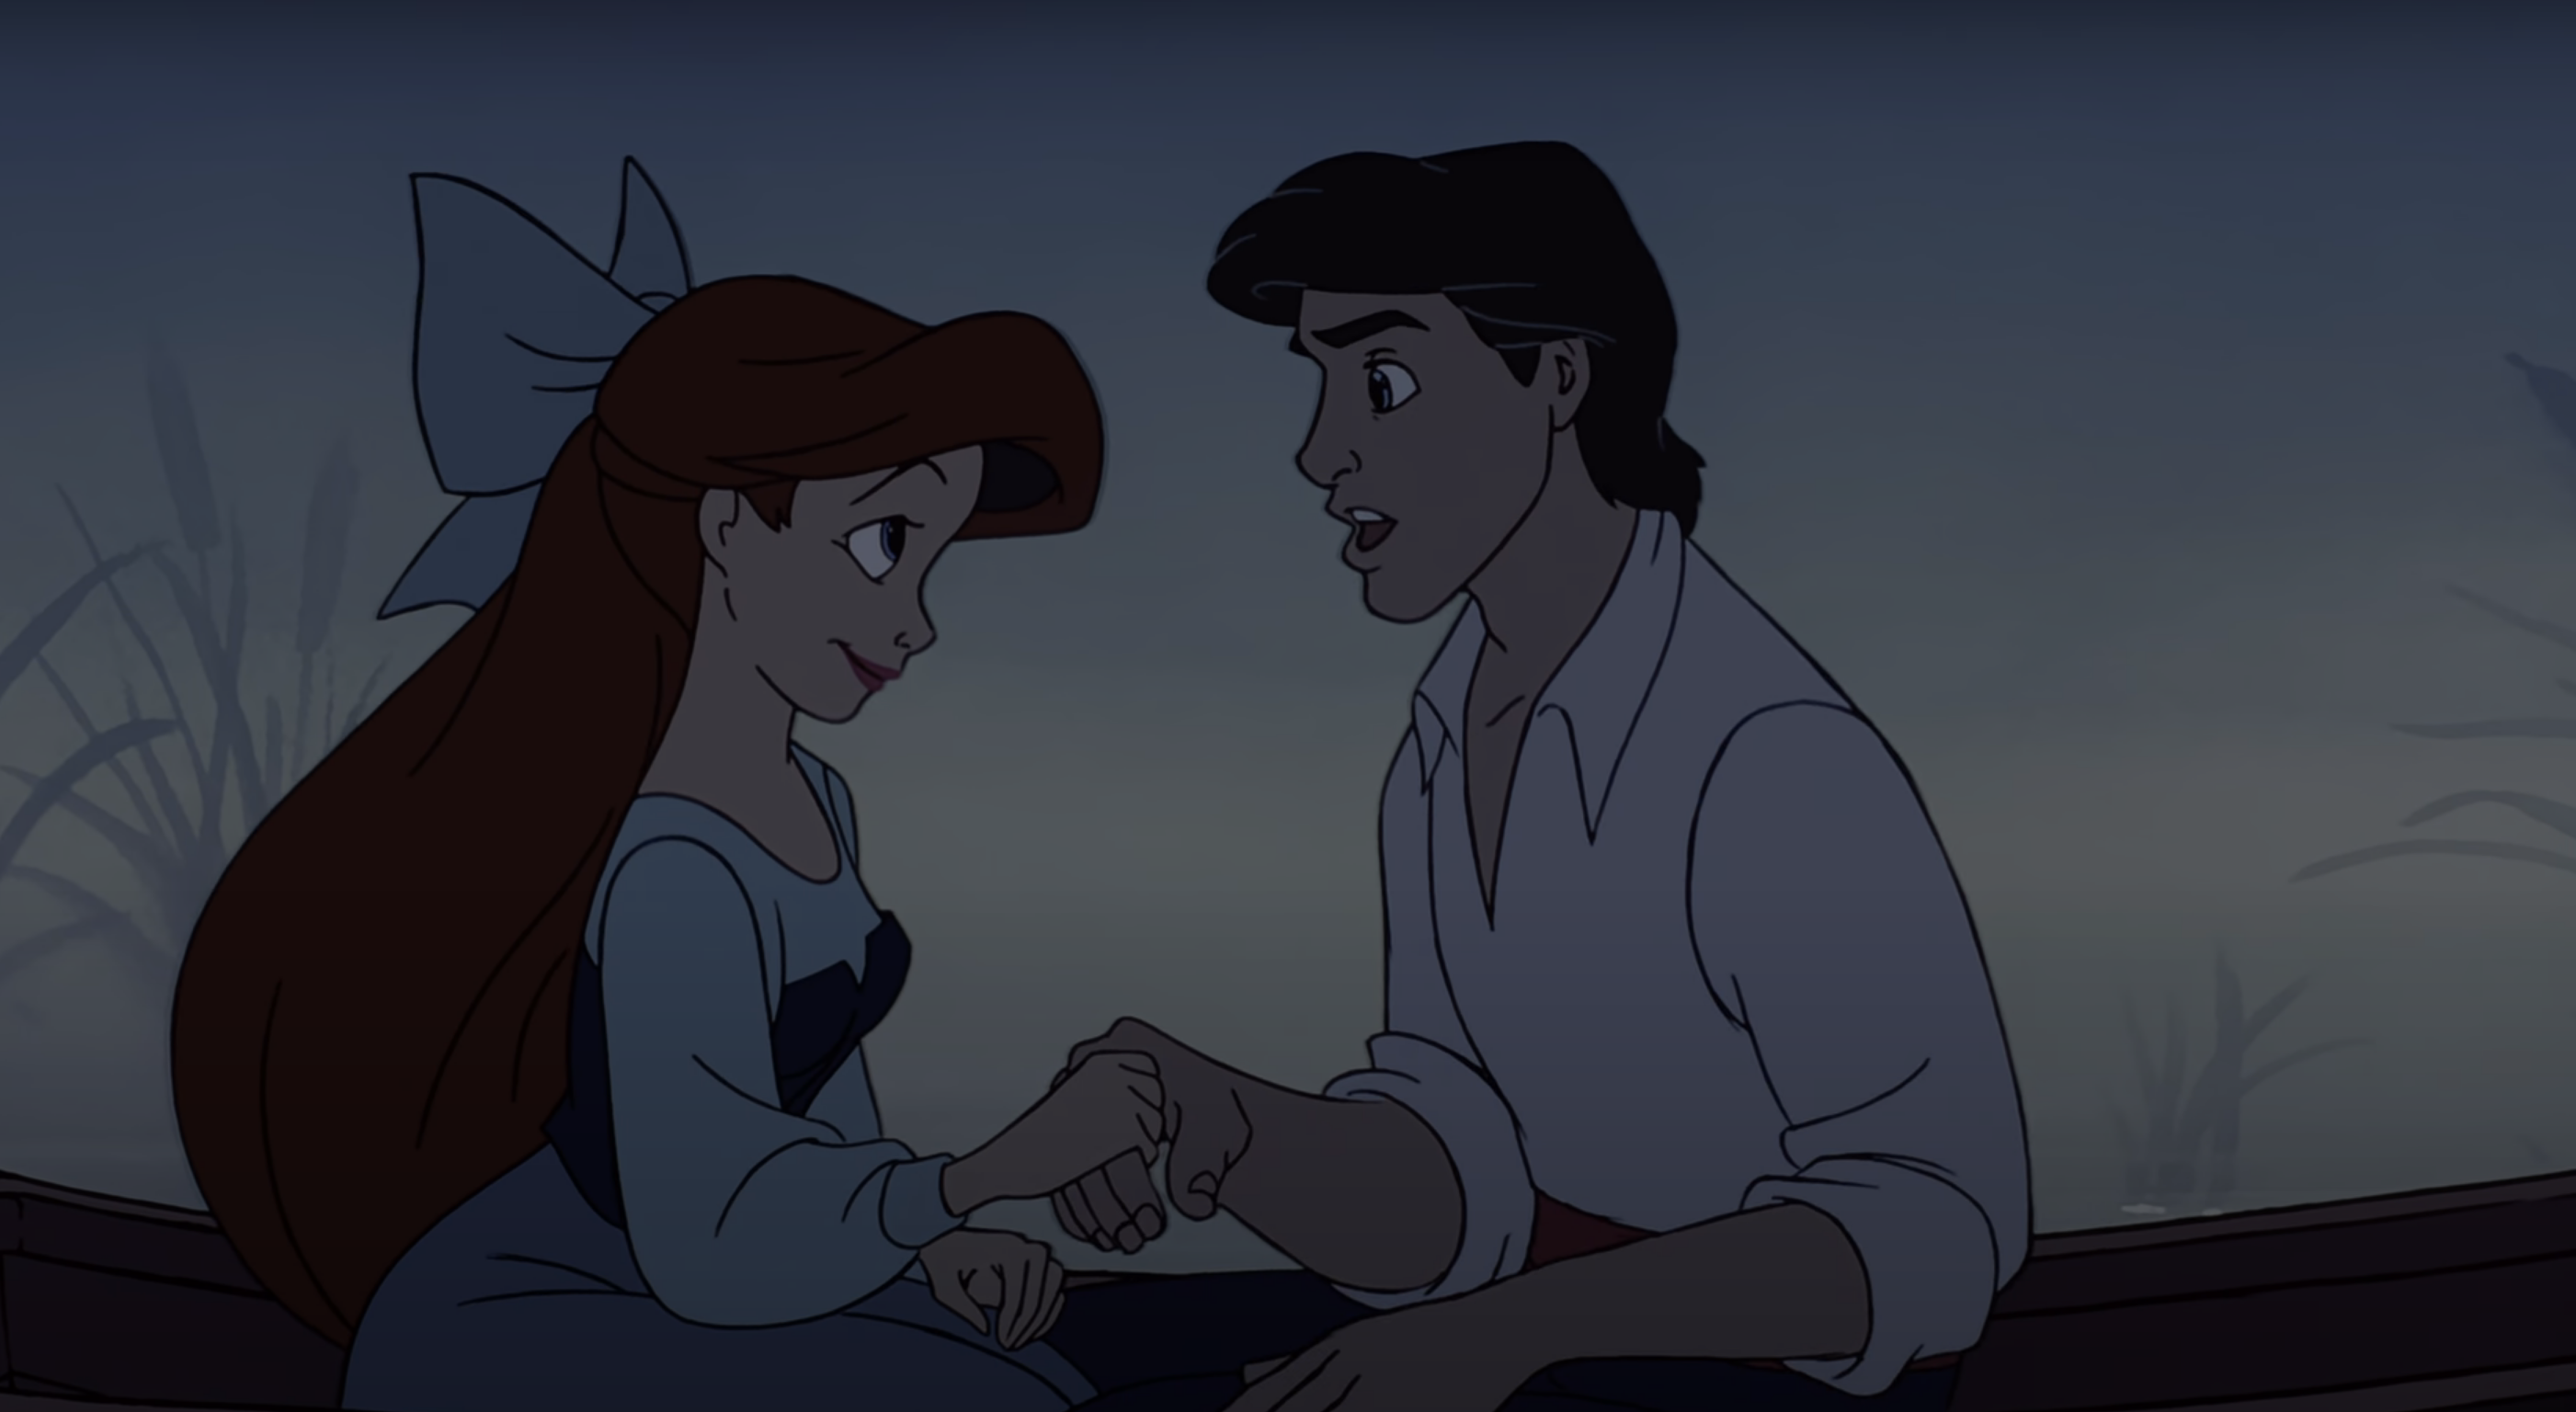 The Little Mermaid' Live-Action Film Modifies Song Lyrics To